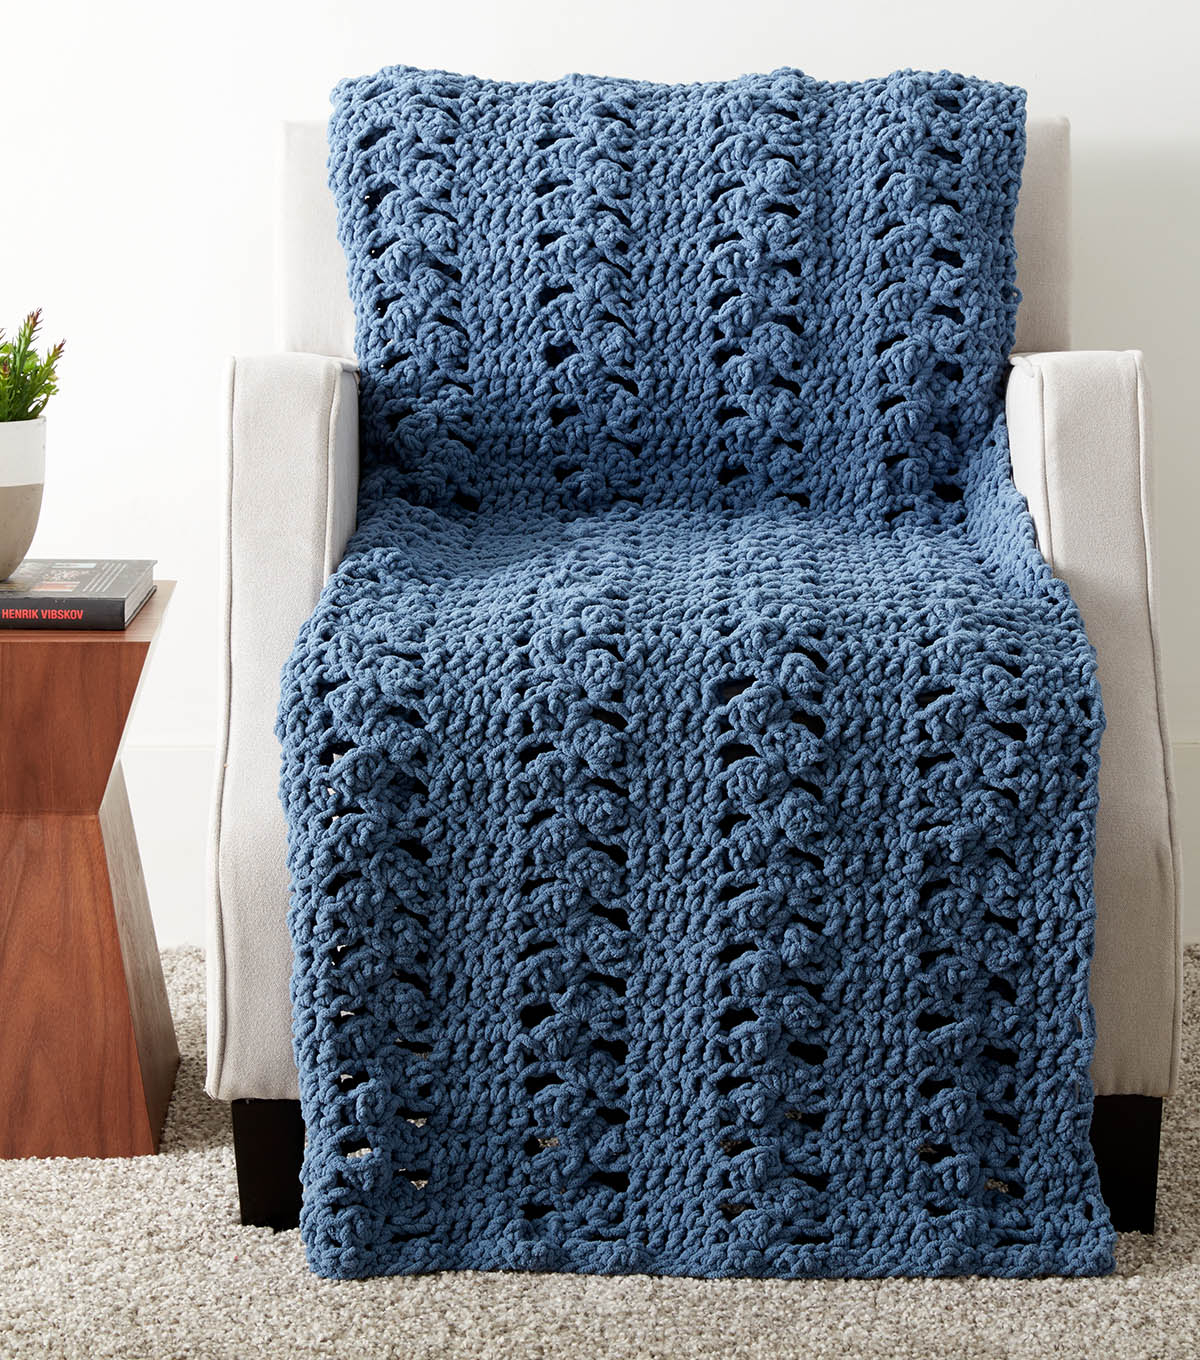 Wave Crochet Pattern How To Make A Here And There Waves Crochet Blanket Joann